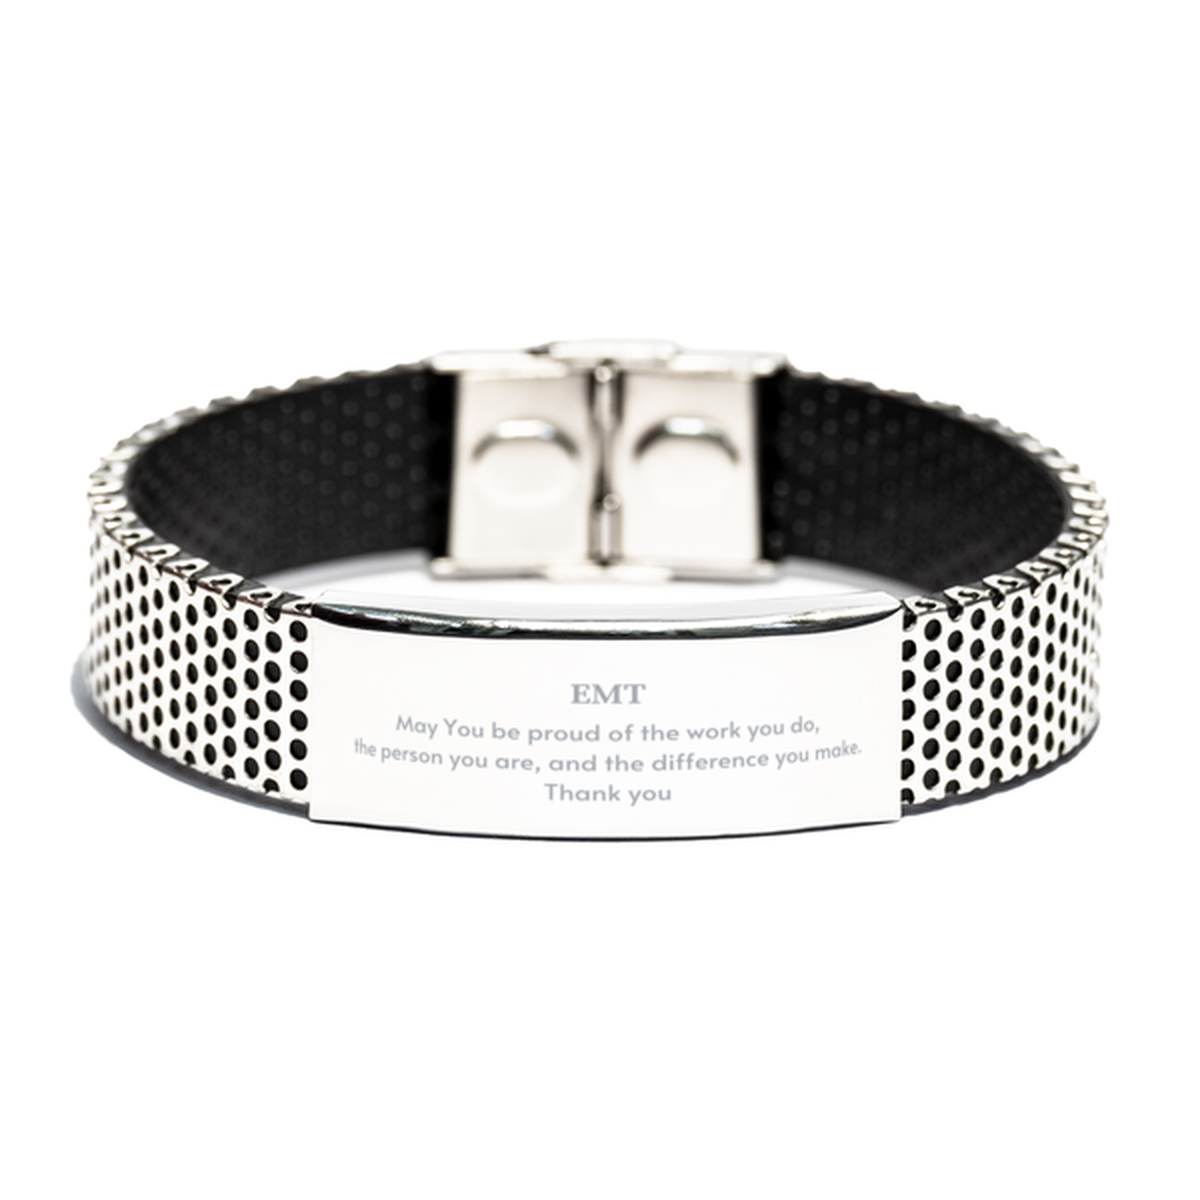 Heartwarming Stainless Steel Bracelet Retirement Coworkers Gifts for EMT, EMT May You be proud of the work you do, the person you are Gifts for Boss Men Women Friends